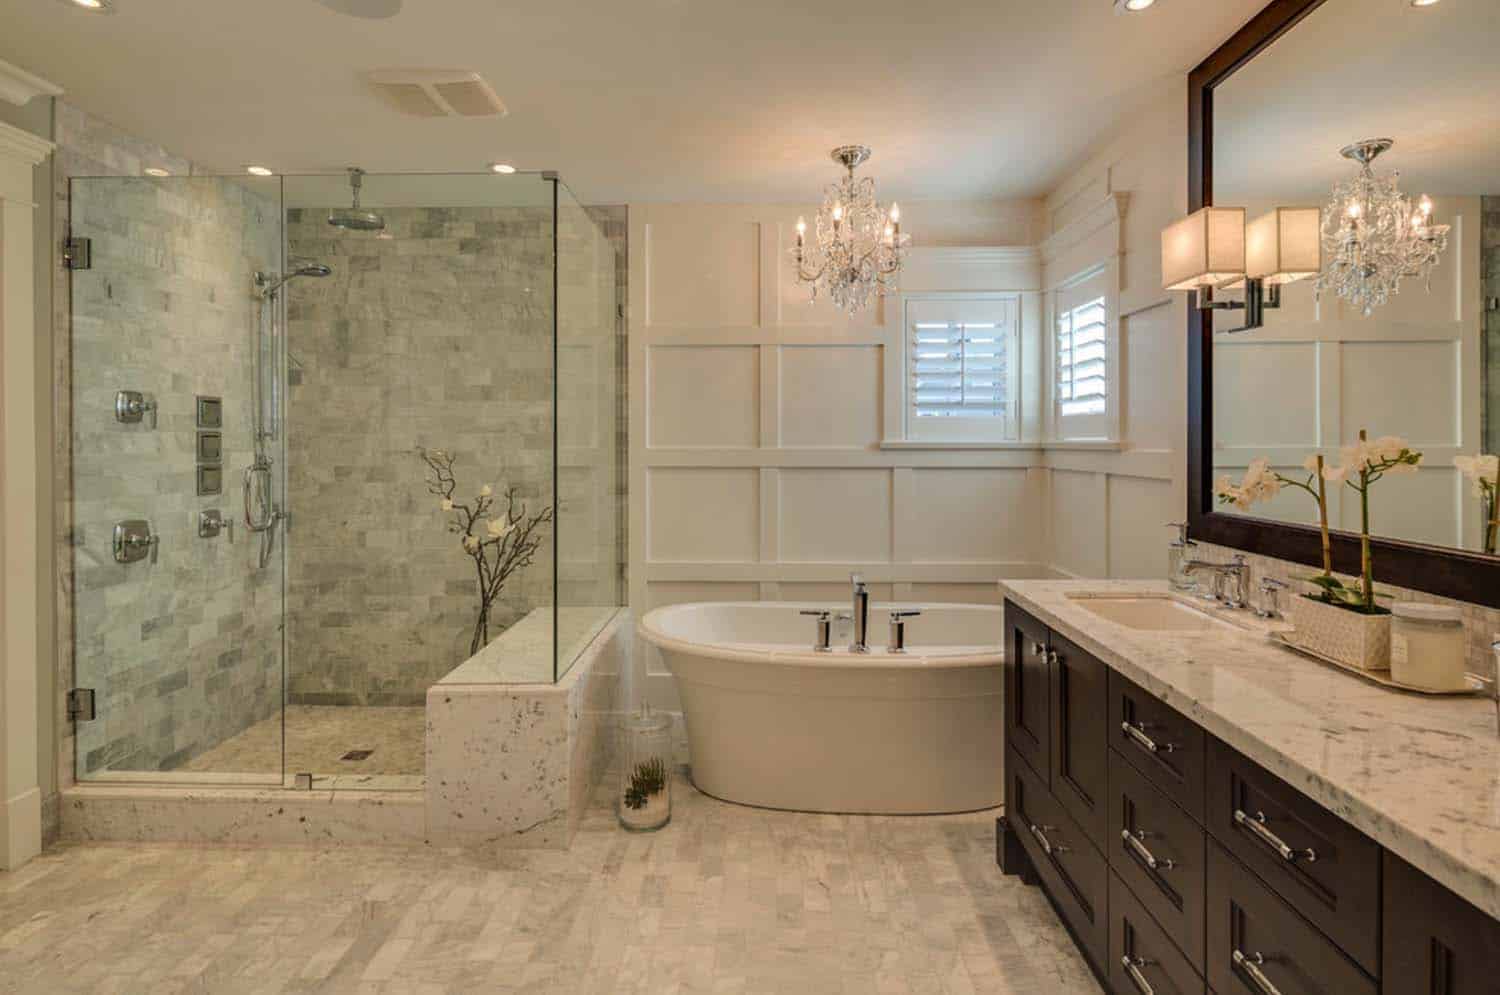 53 Most fabulous traditional style bathroom designs ever